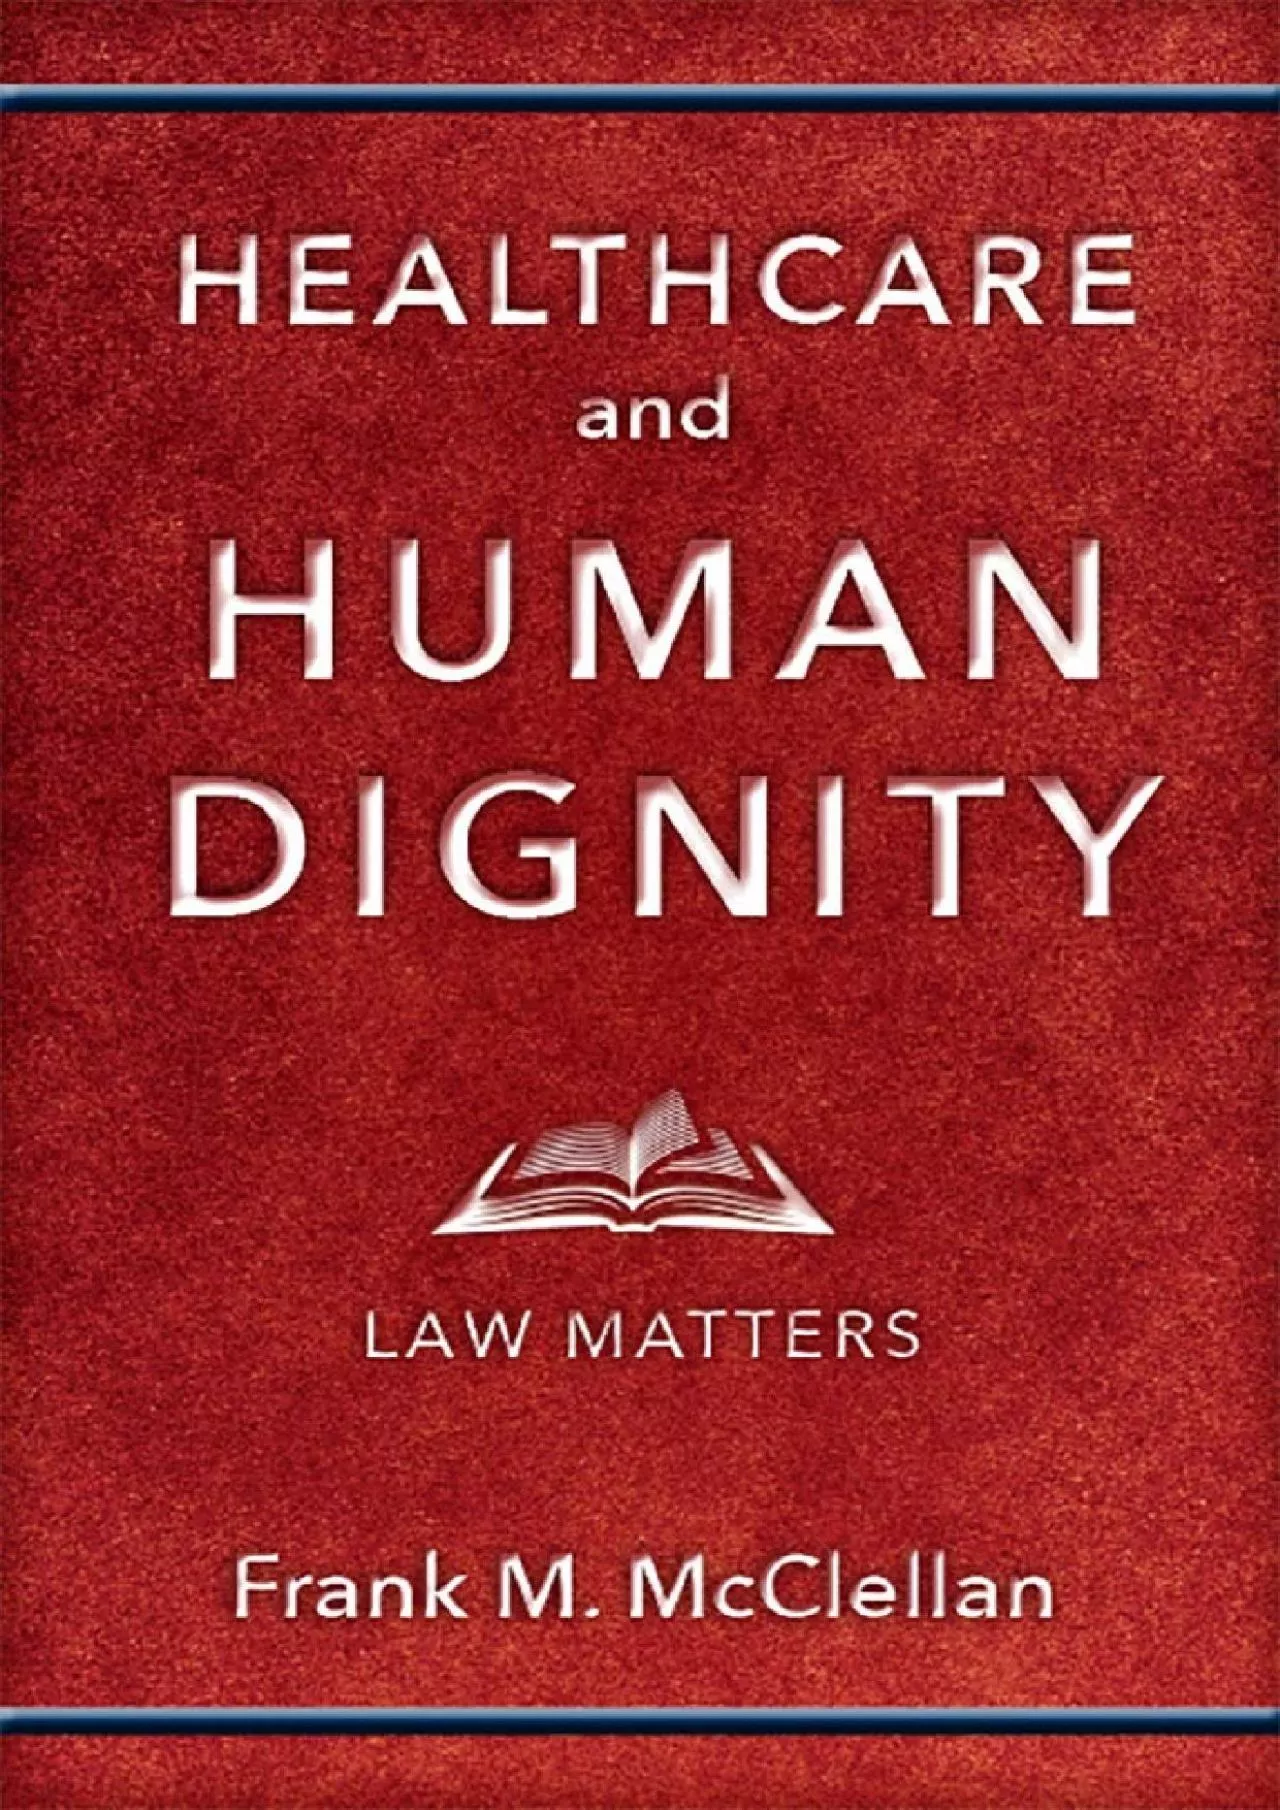 (DOWNLOAD)-Healthcare and Human Dignity: Law Matters (Critical Issues in Health and Medicine)